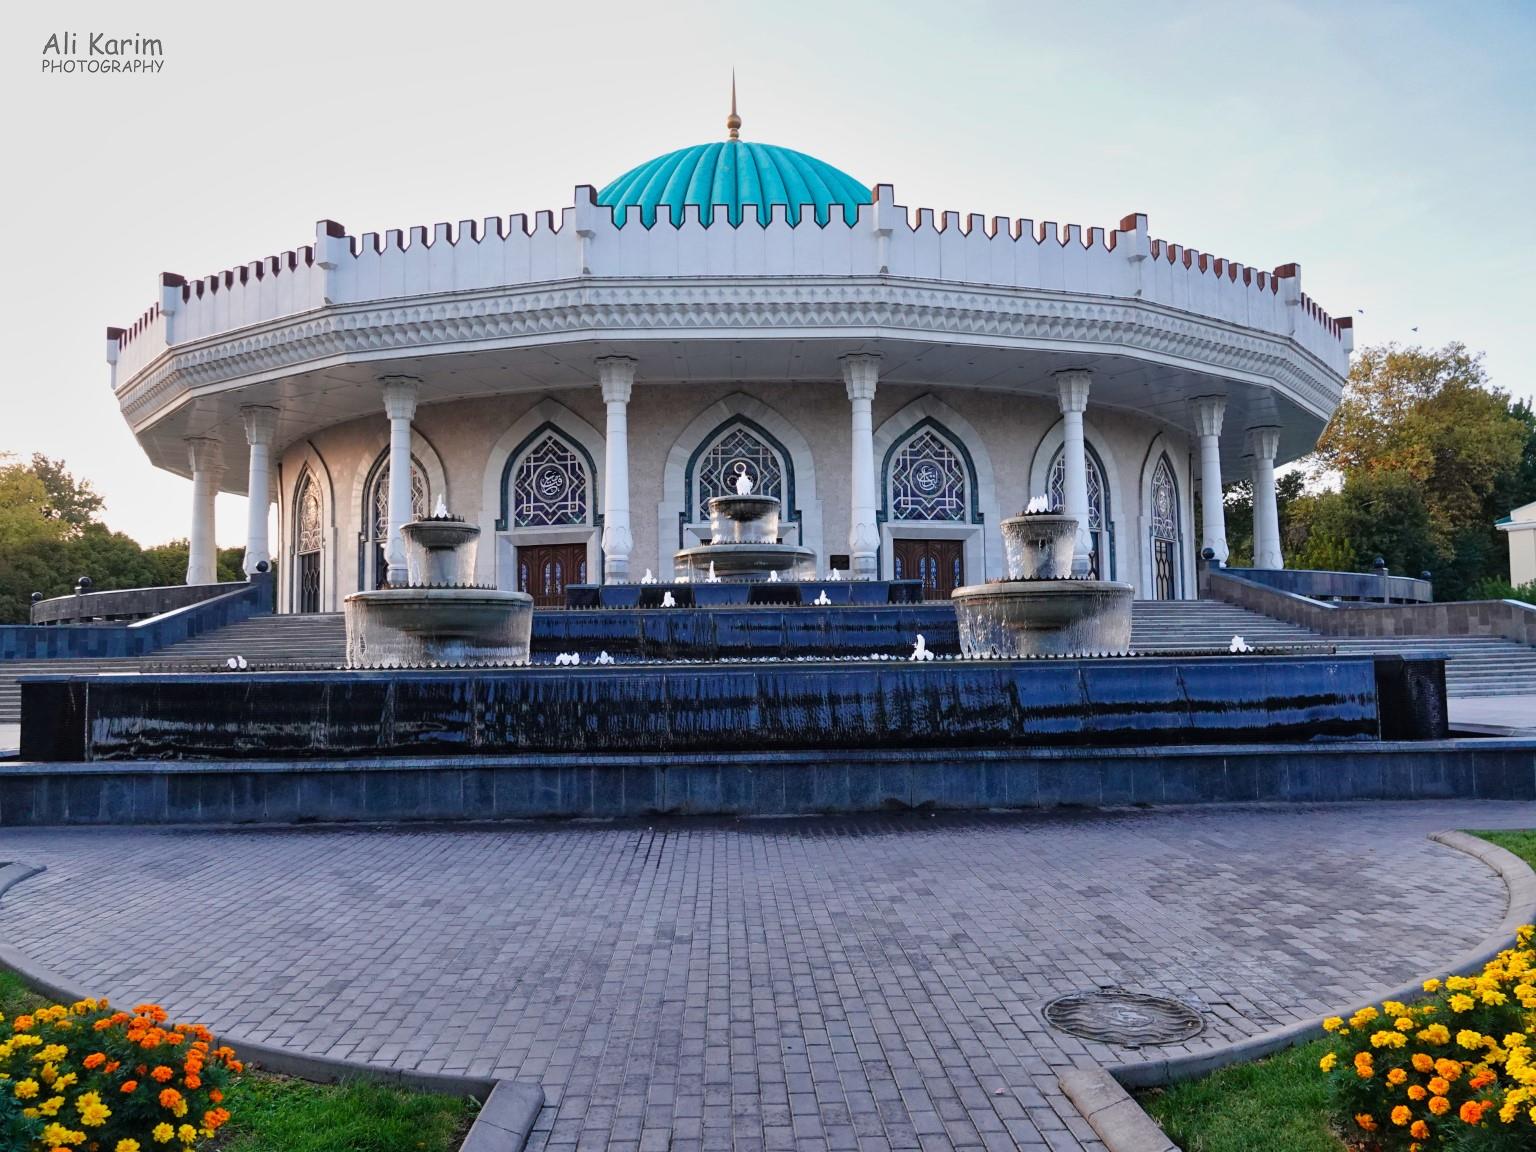 Tashkent, Oct 2019, The State History Museum of the Timurids; or the Amir Timur Museum as more commonly known. Unfortunately, it was closed when we went.